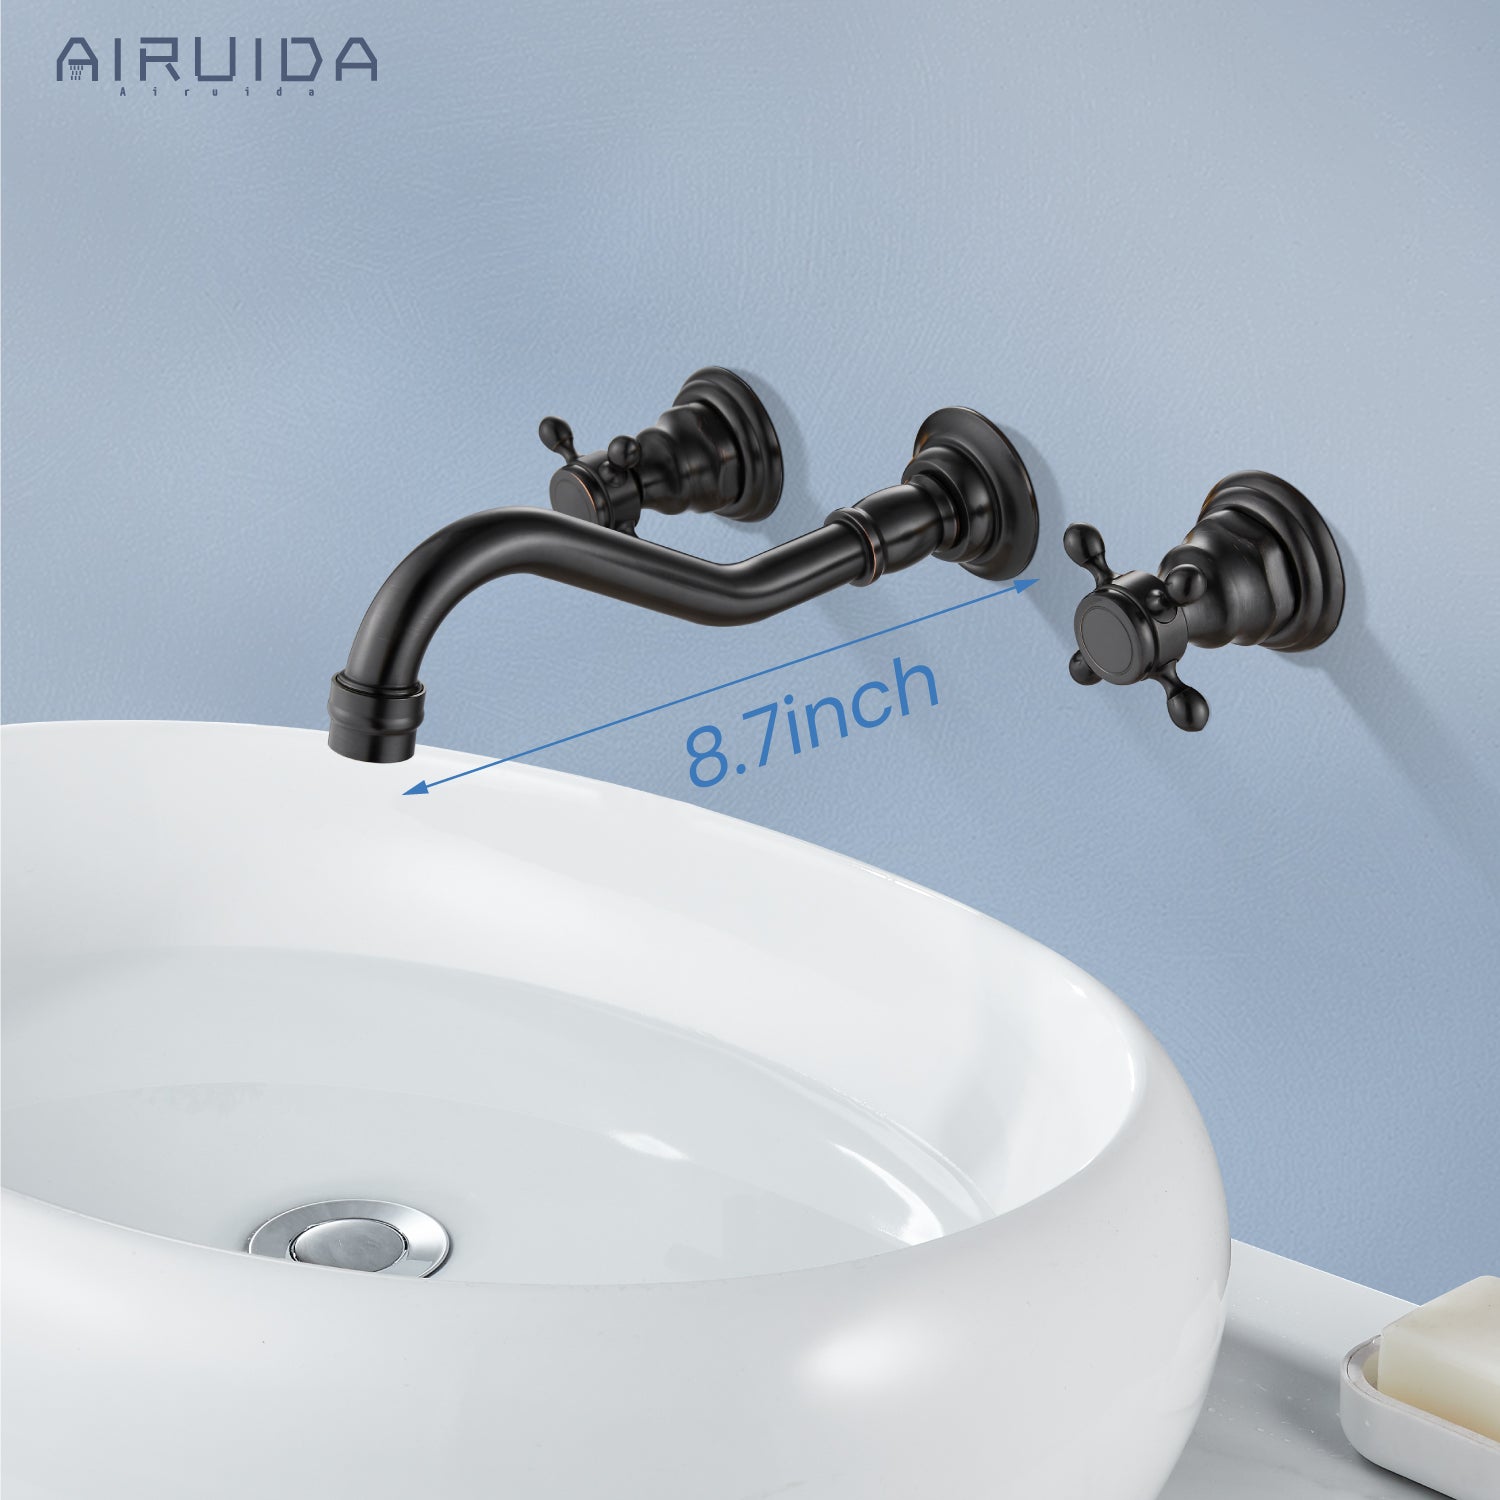 Airuida Wall Mount Faucet, Widespread Wall Mount Bathroom Sink Faucet, 360 Swivel Spout 2 Cross Knobs Handles 3 Holes Lavatory Basin Sink Mixing Faucet with Rough in Valve